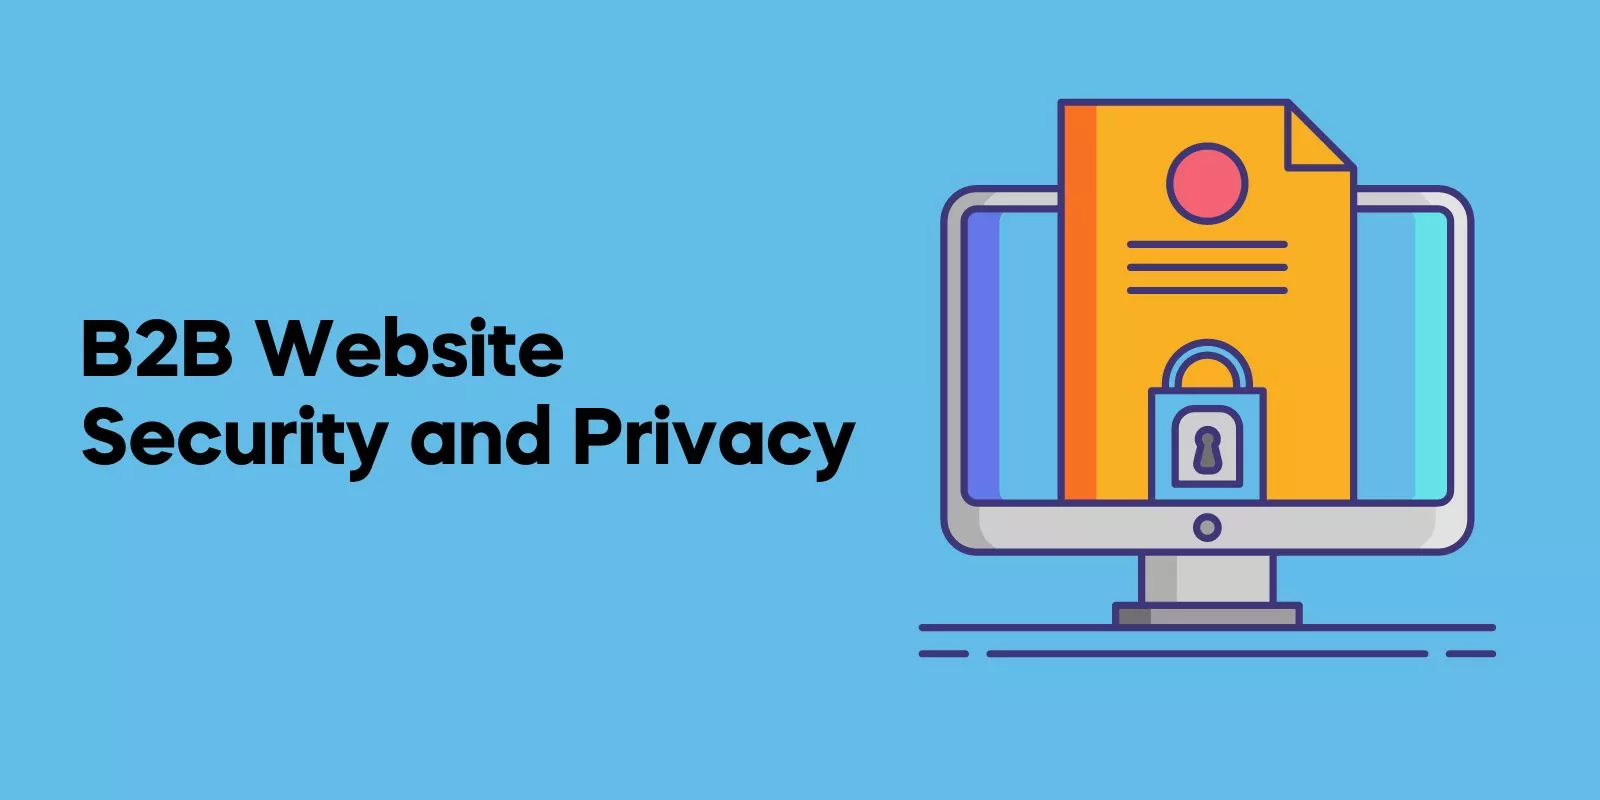 B2B Website Security and Privacy